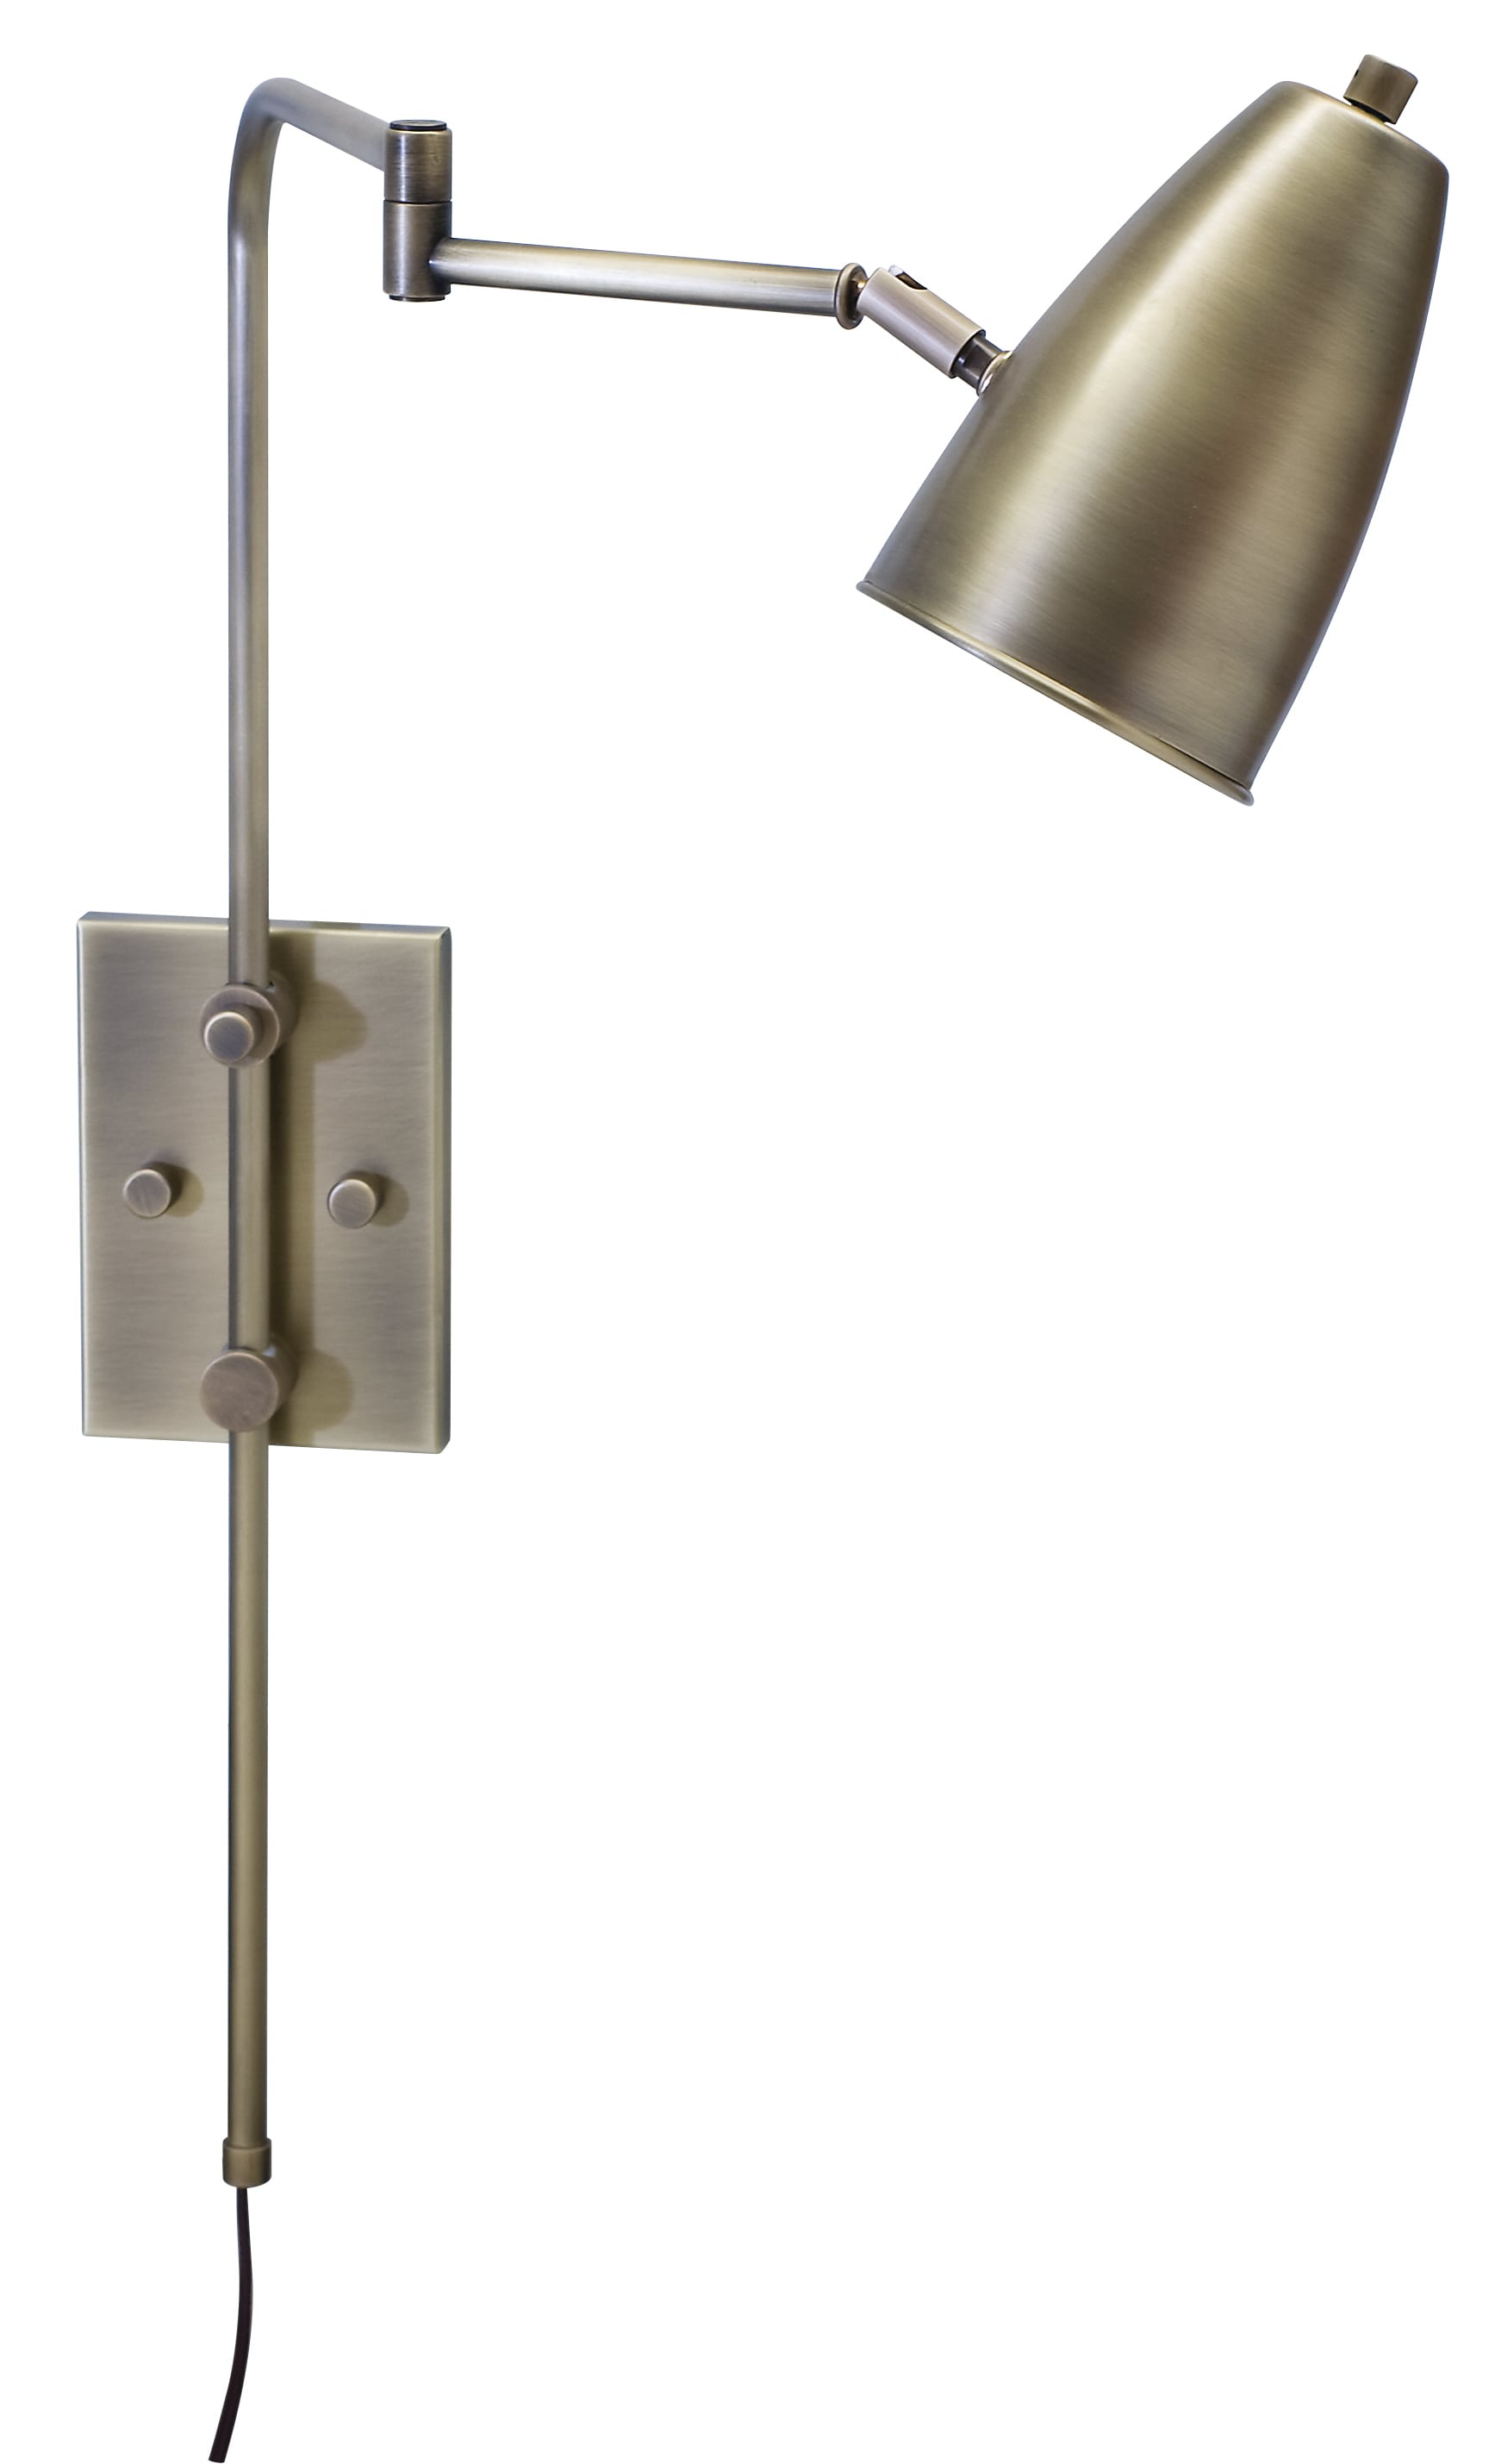 Oil Rubbed Bronze Finish House of Troy Lighting C175-OB Cambridge 1-Light Adjustable Swing-Arm Wall Lamp